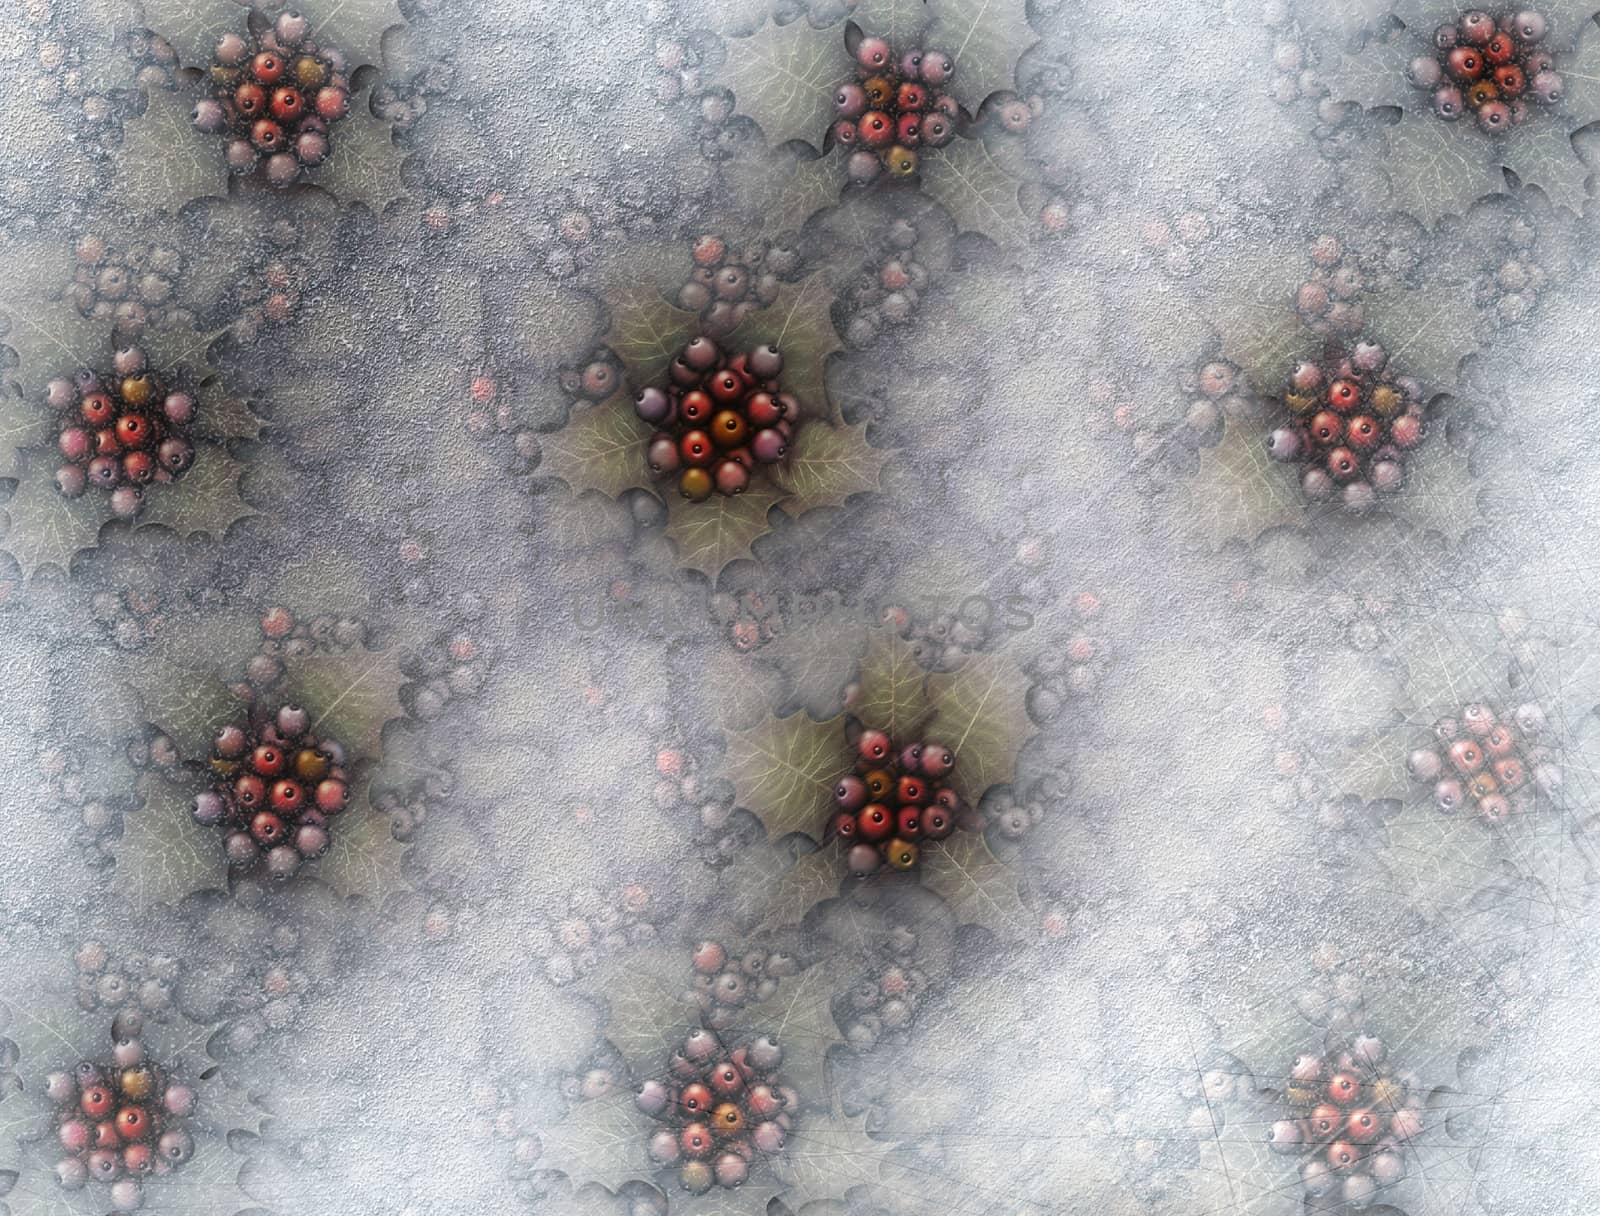 Digital illustration of ice and frost covered holly plants below the surface of a frozen pond.